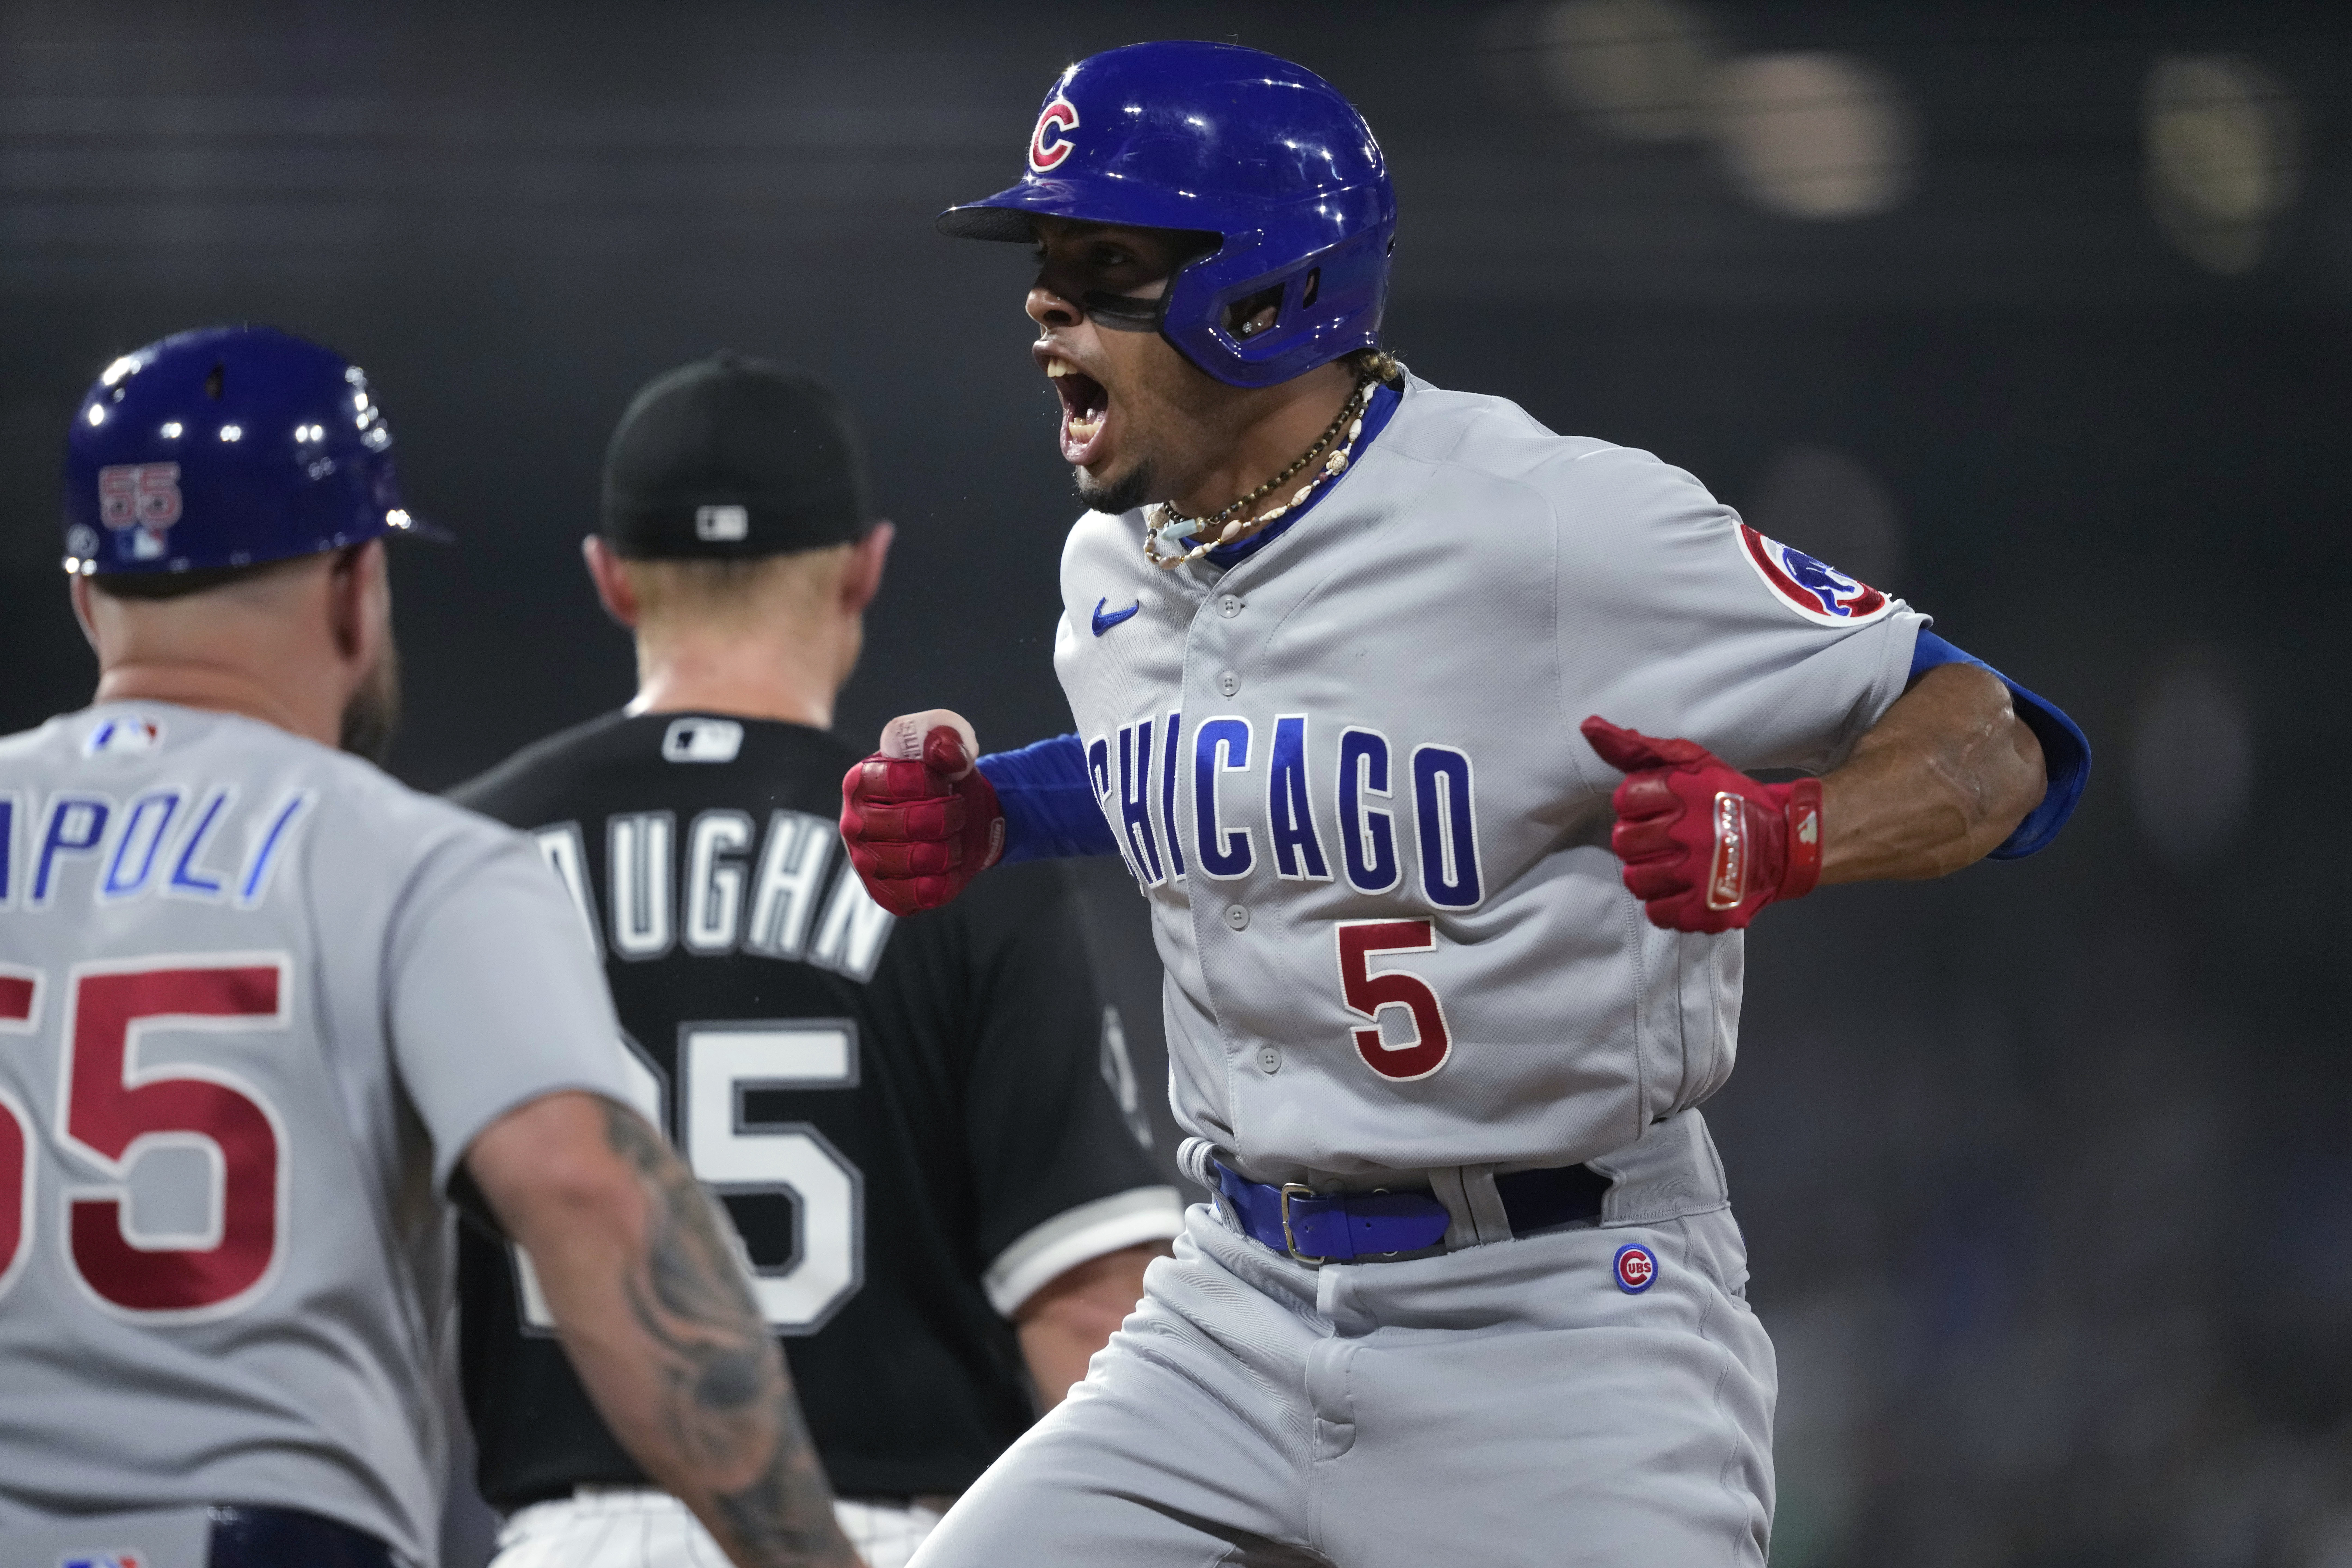 Pederson homers in 3rd straight game, Cubs beat Cards 7-2